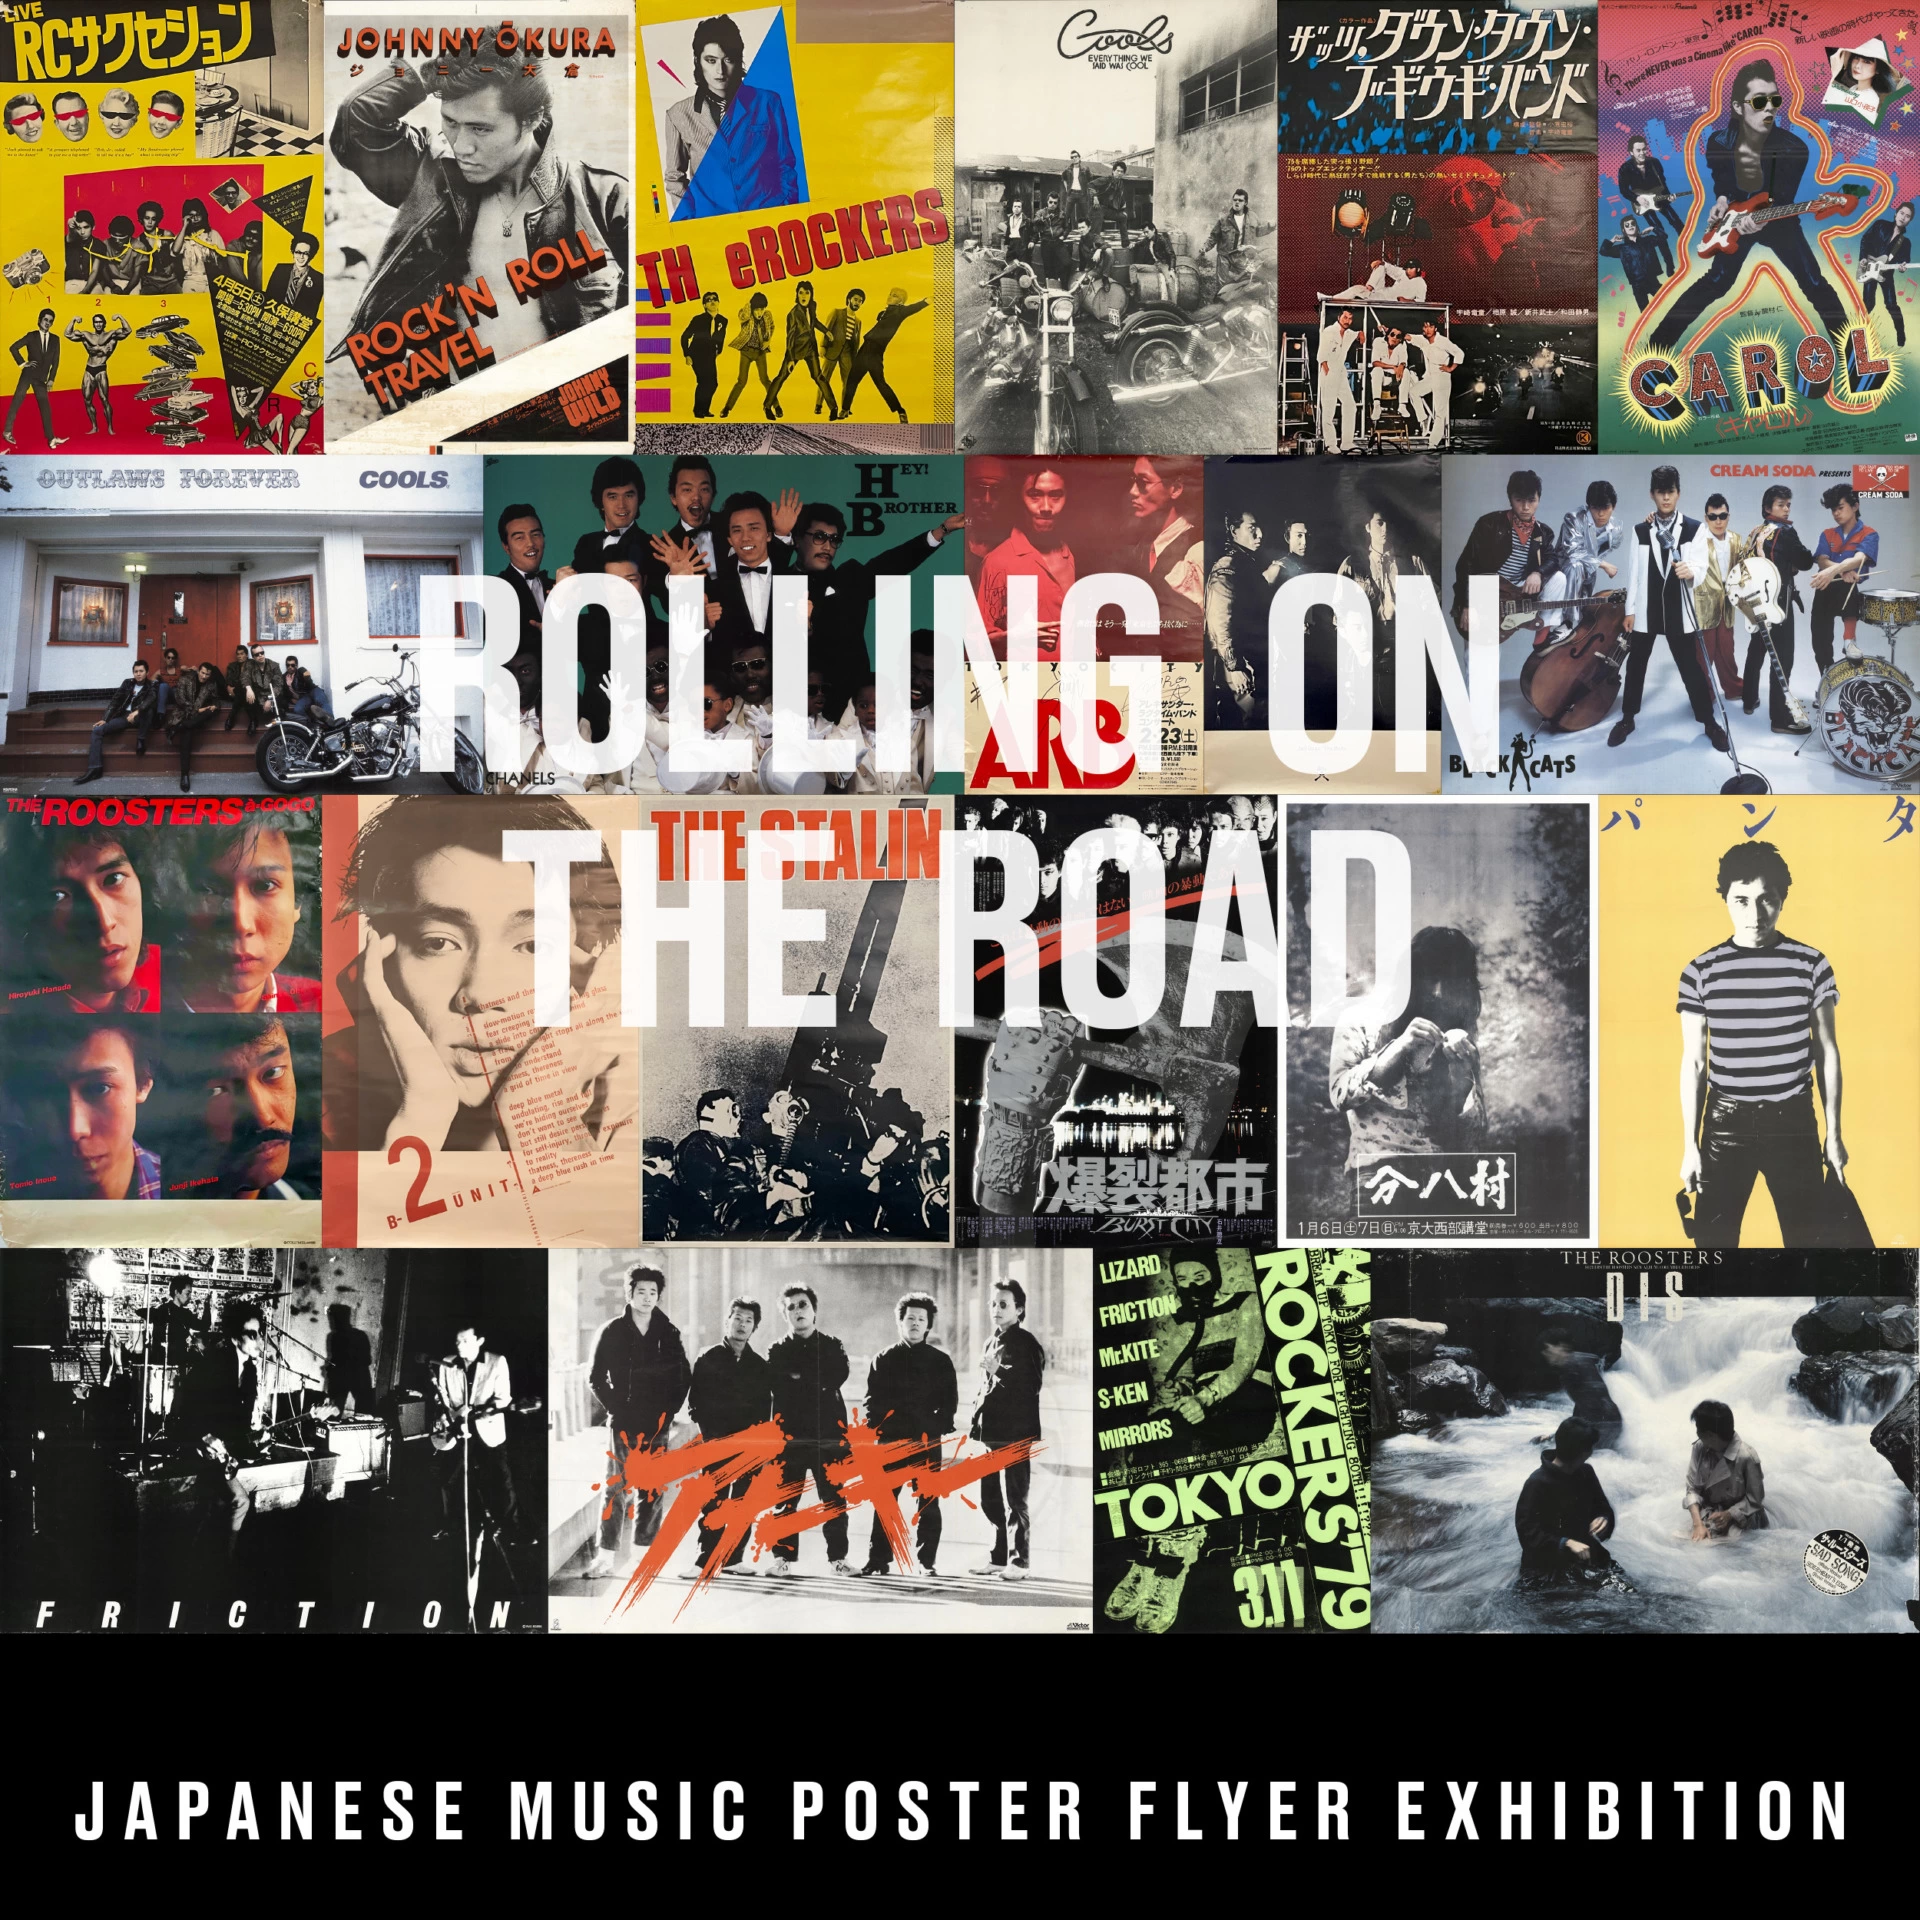 ROLLING ON THE ROAD 発刊記念 JAPANESE MUSIC POSTER FLYER EXHIBITION 井出 靖が見た東京の景色 PART.2